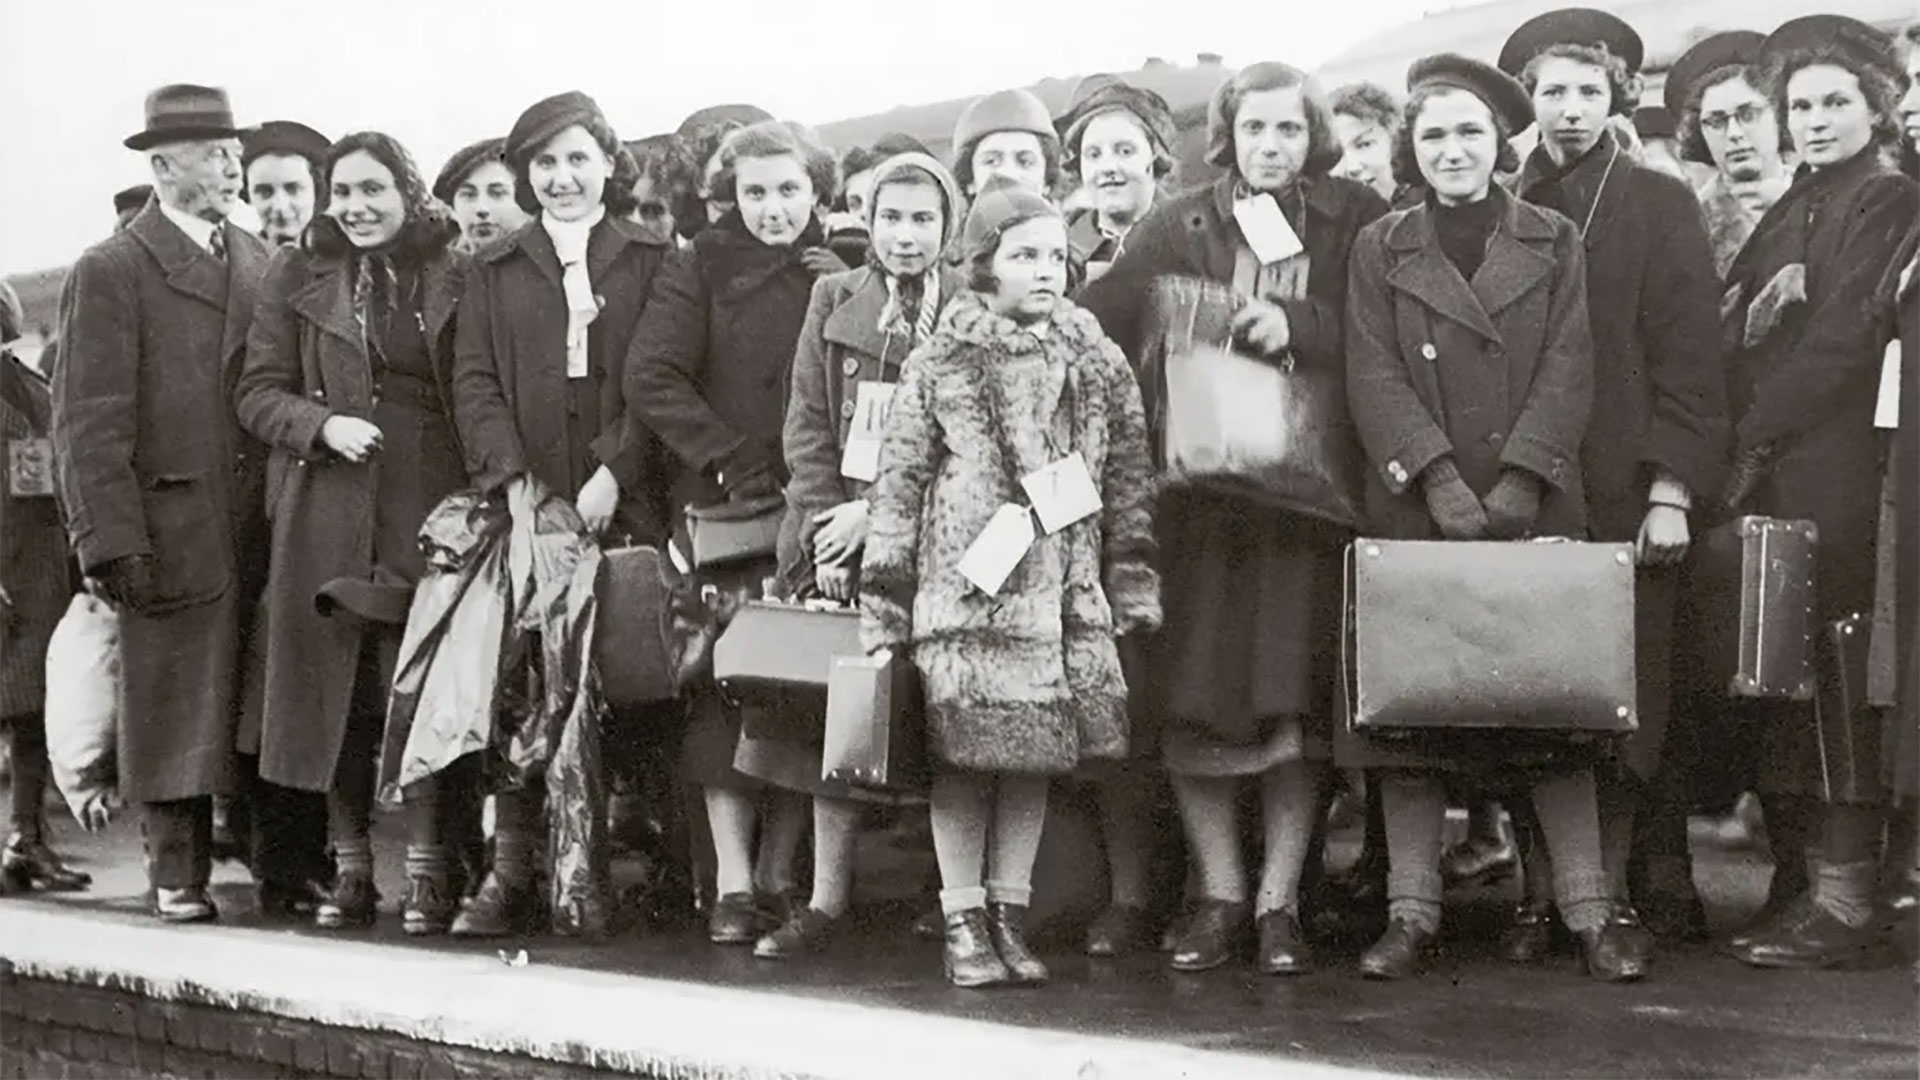 Refugees From Nazism in the British Clothing Industry